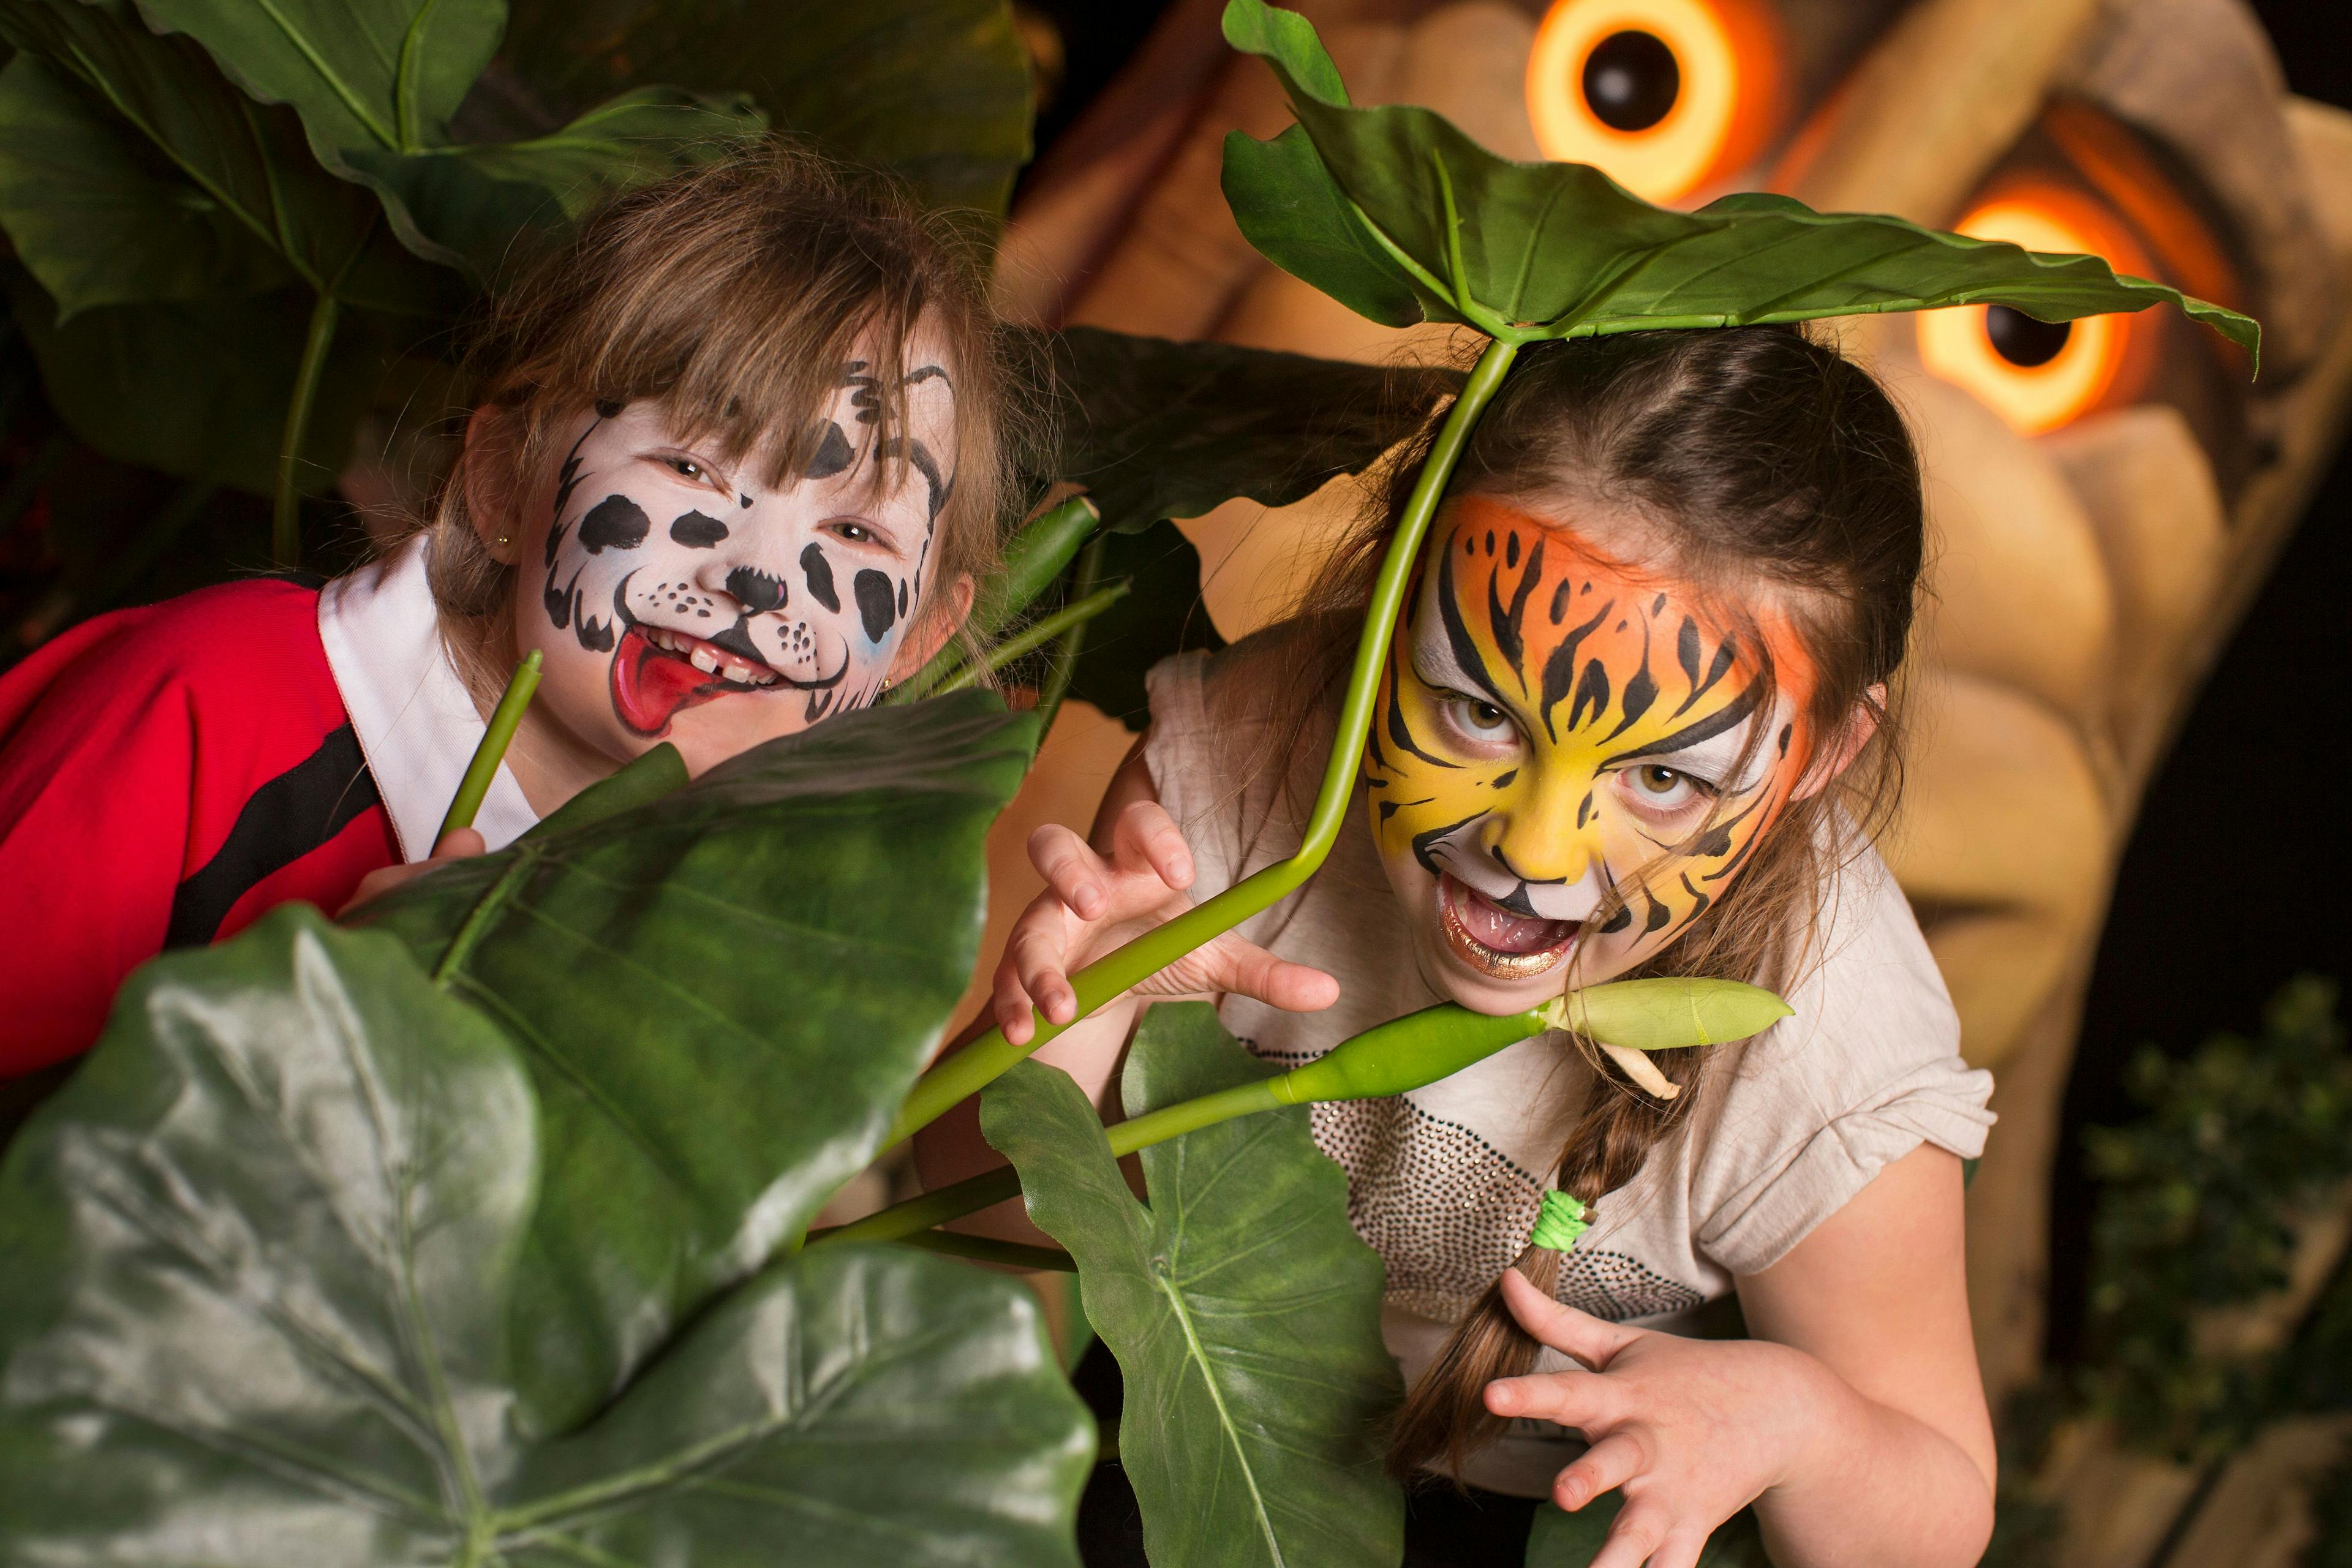 Two children posing with their faces painted.